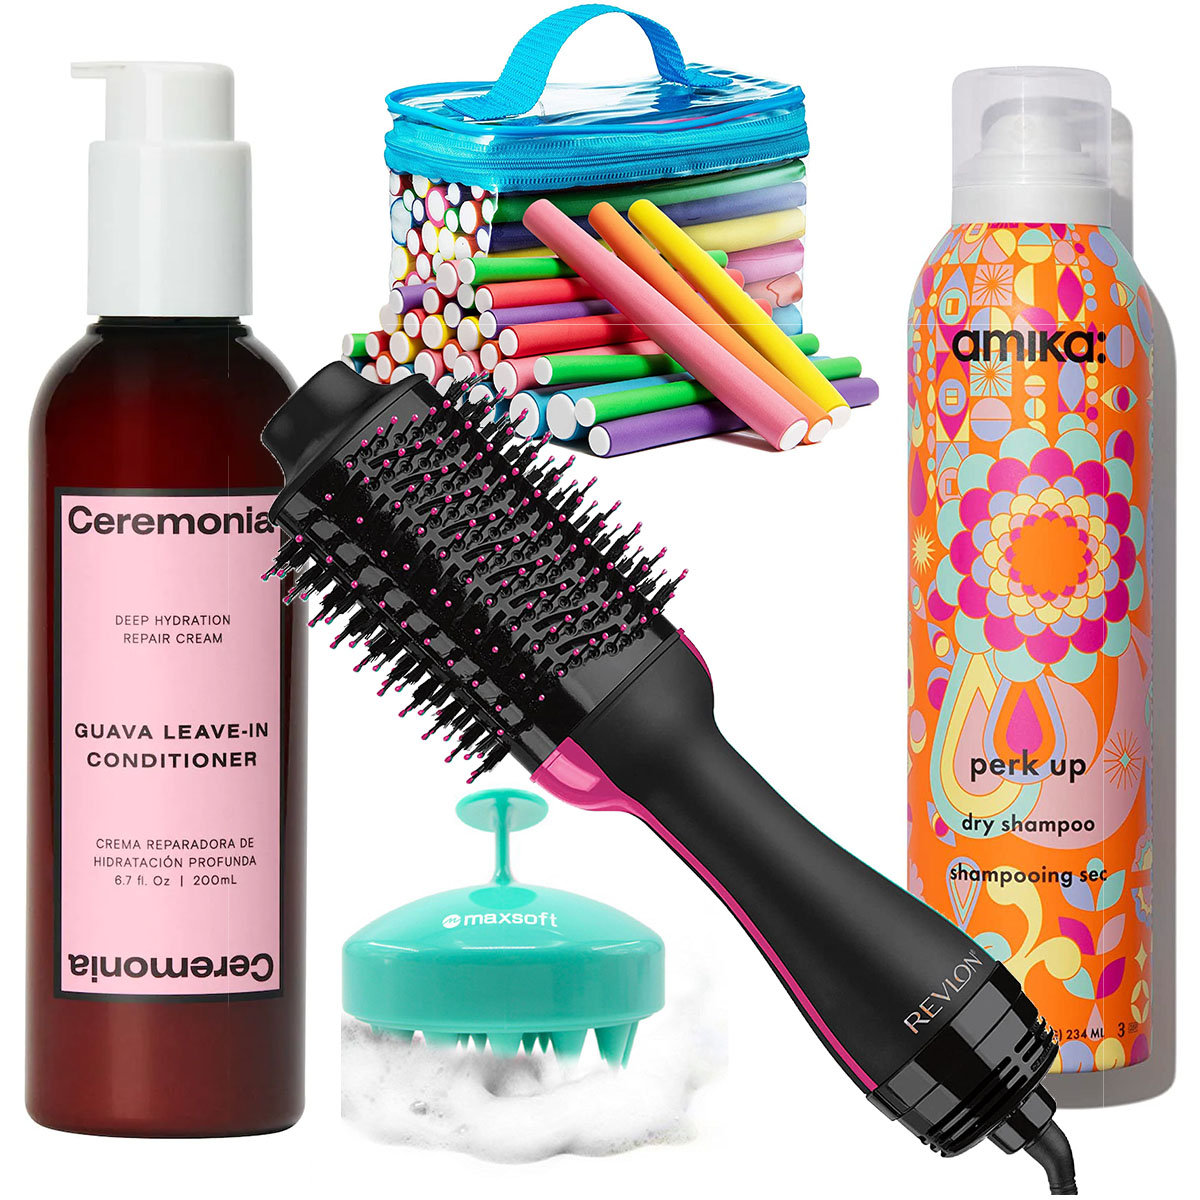 15 Affordable Hair Products That Will Give You Salon-Worthy Results